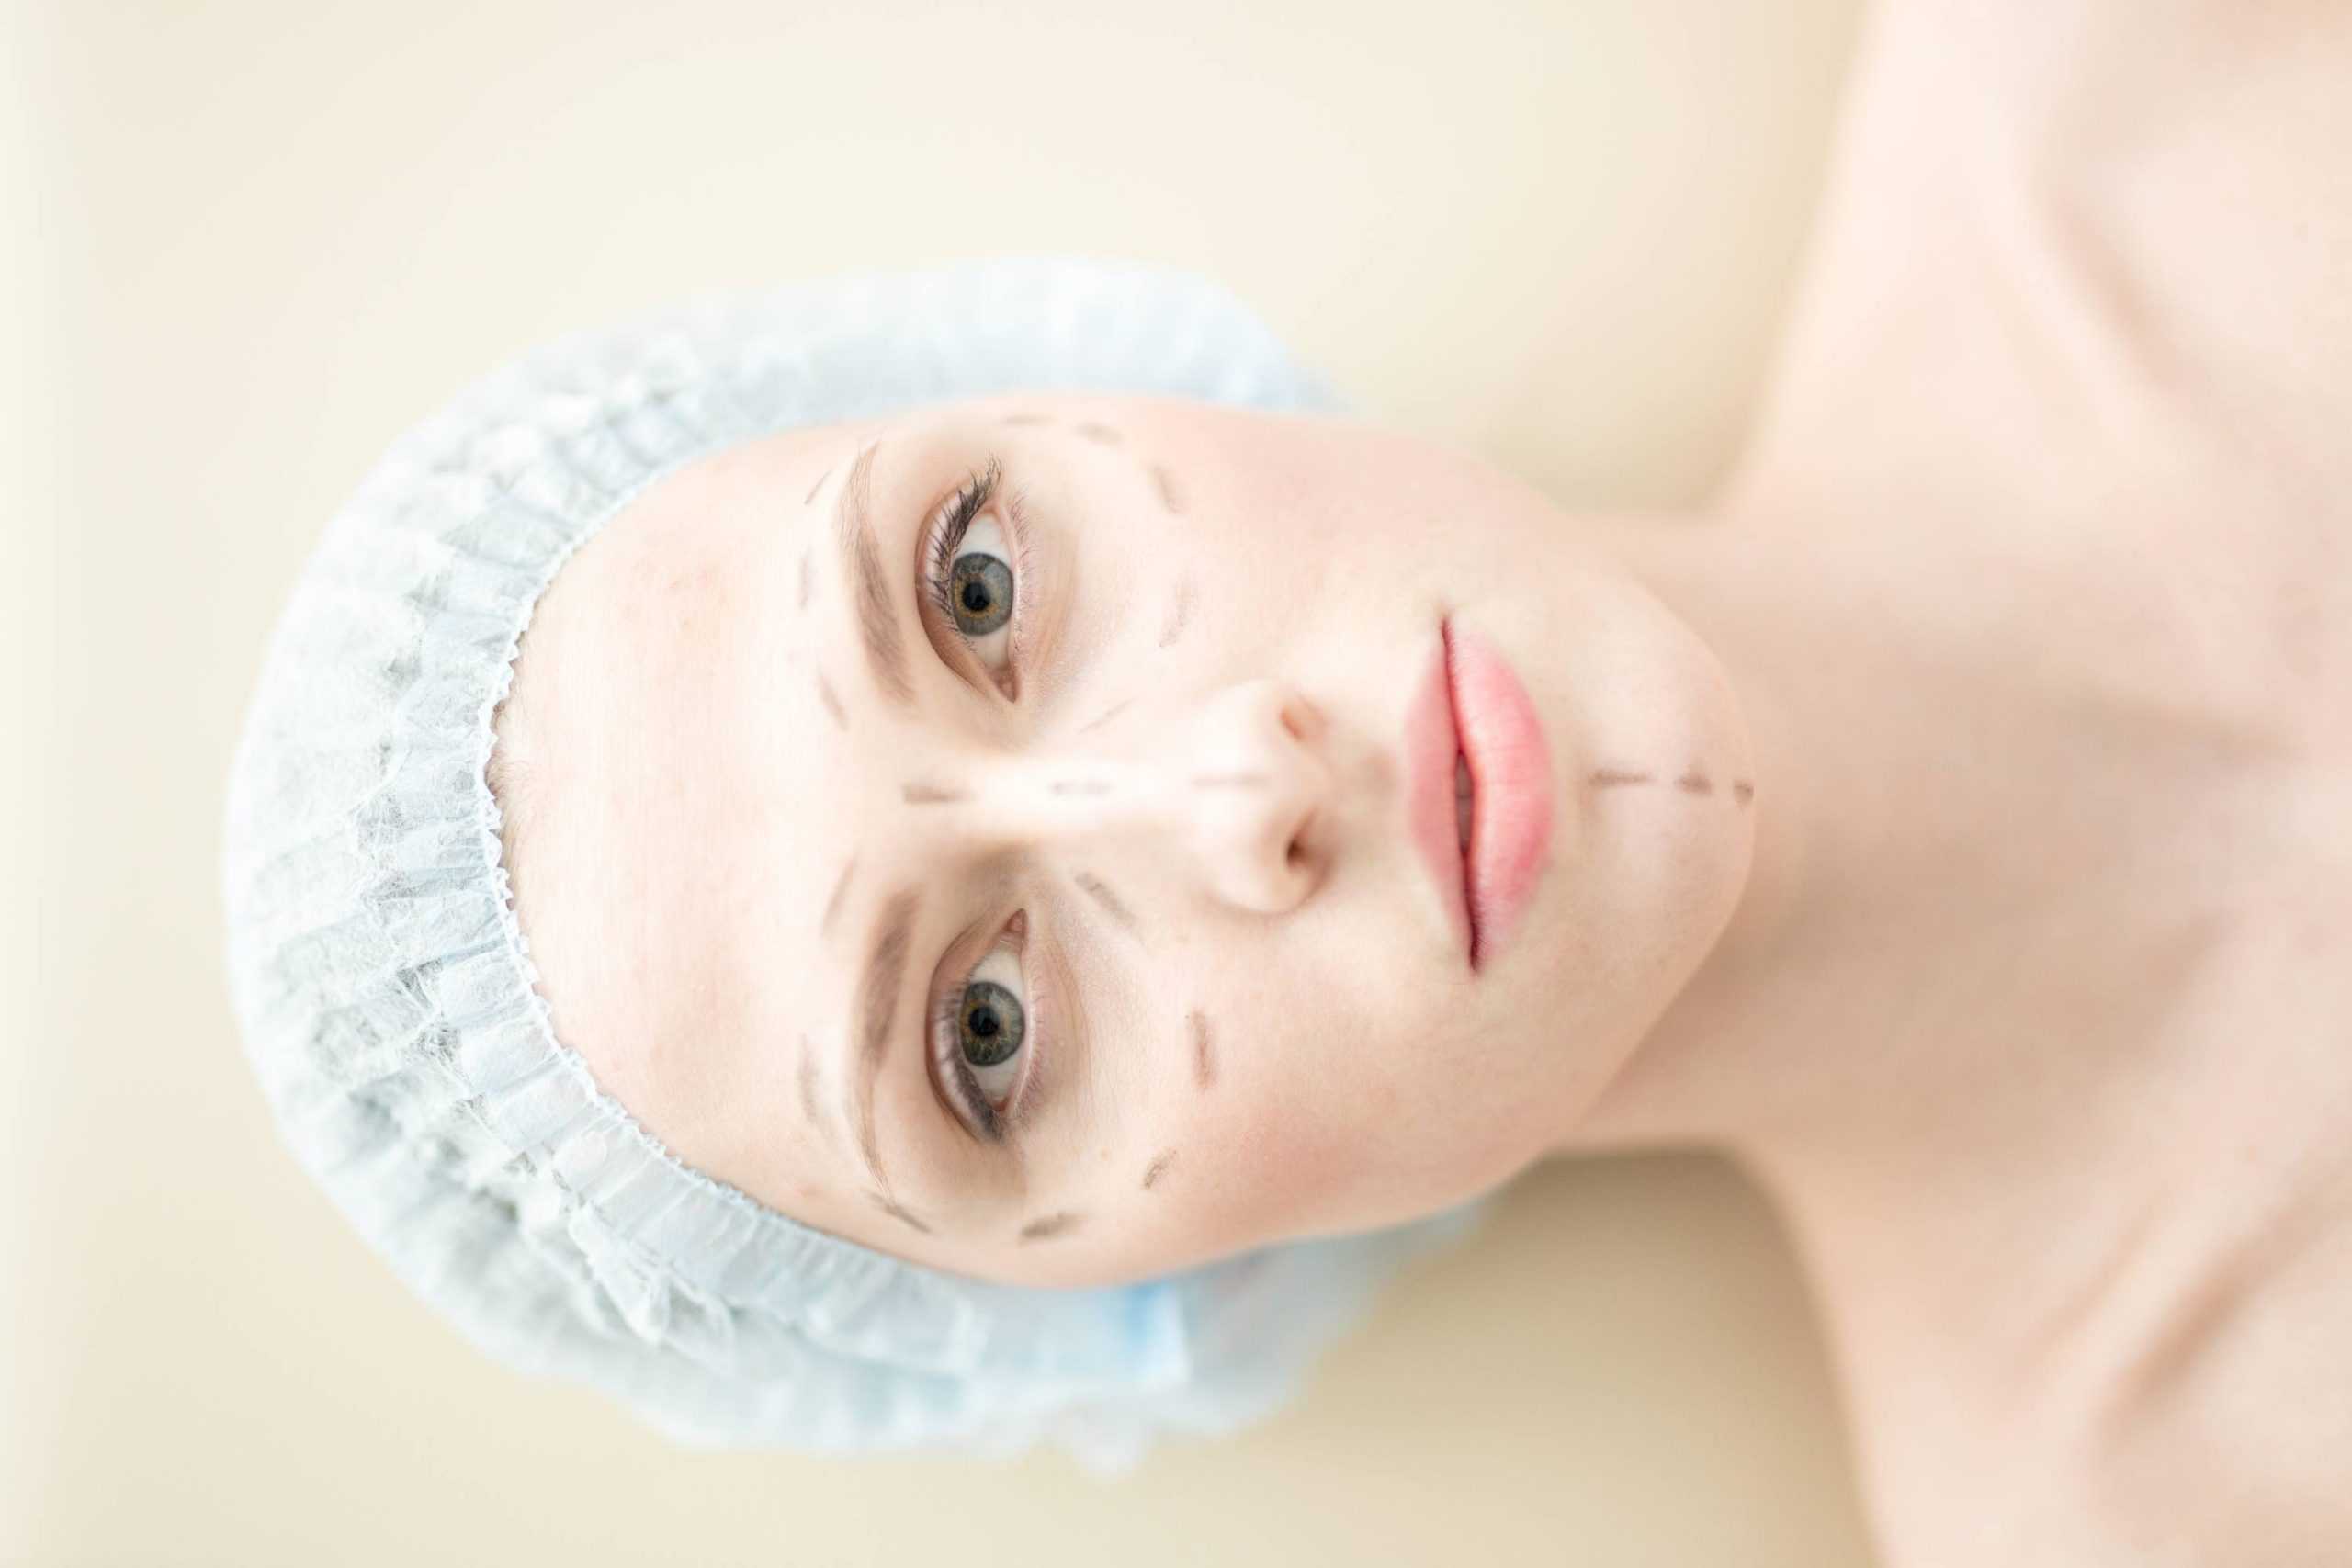 How to prepare for cosmetic plastic surgery